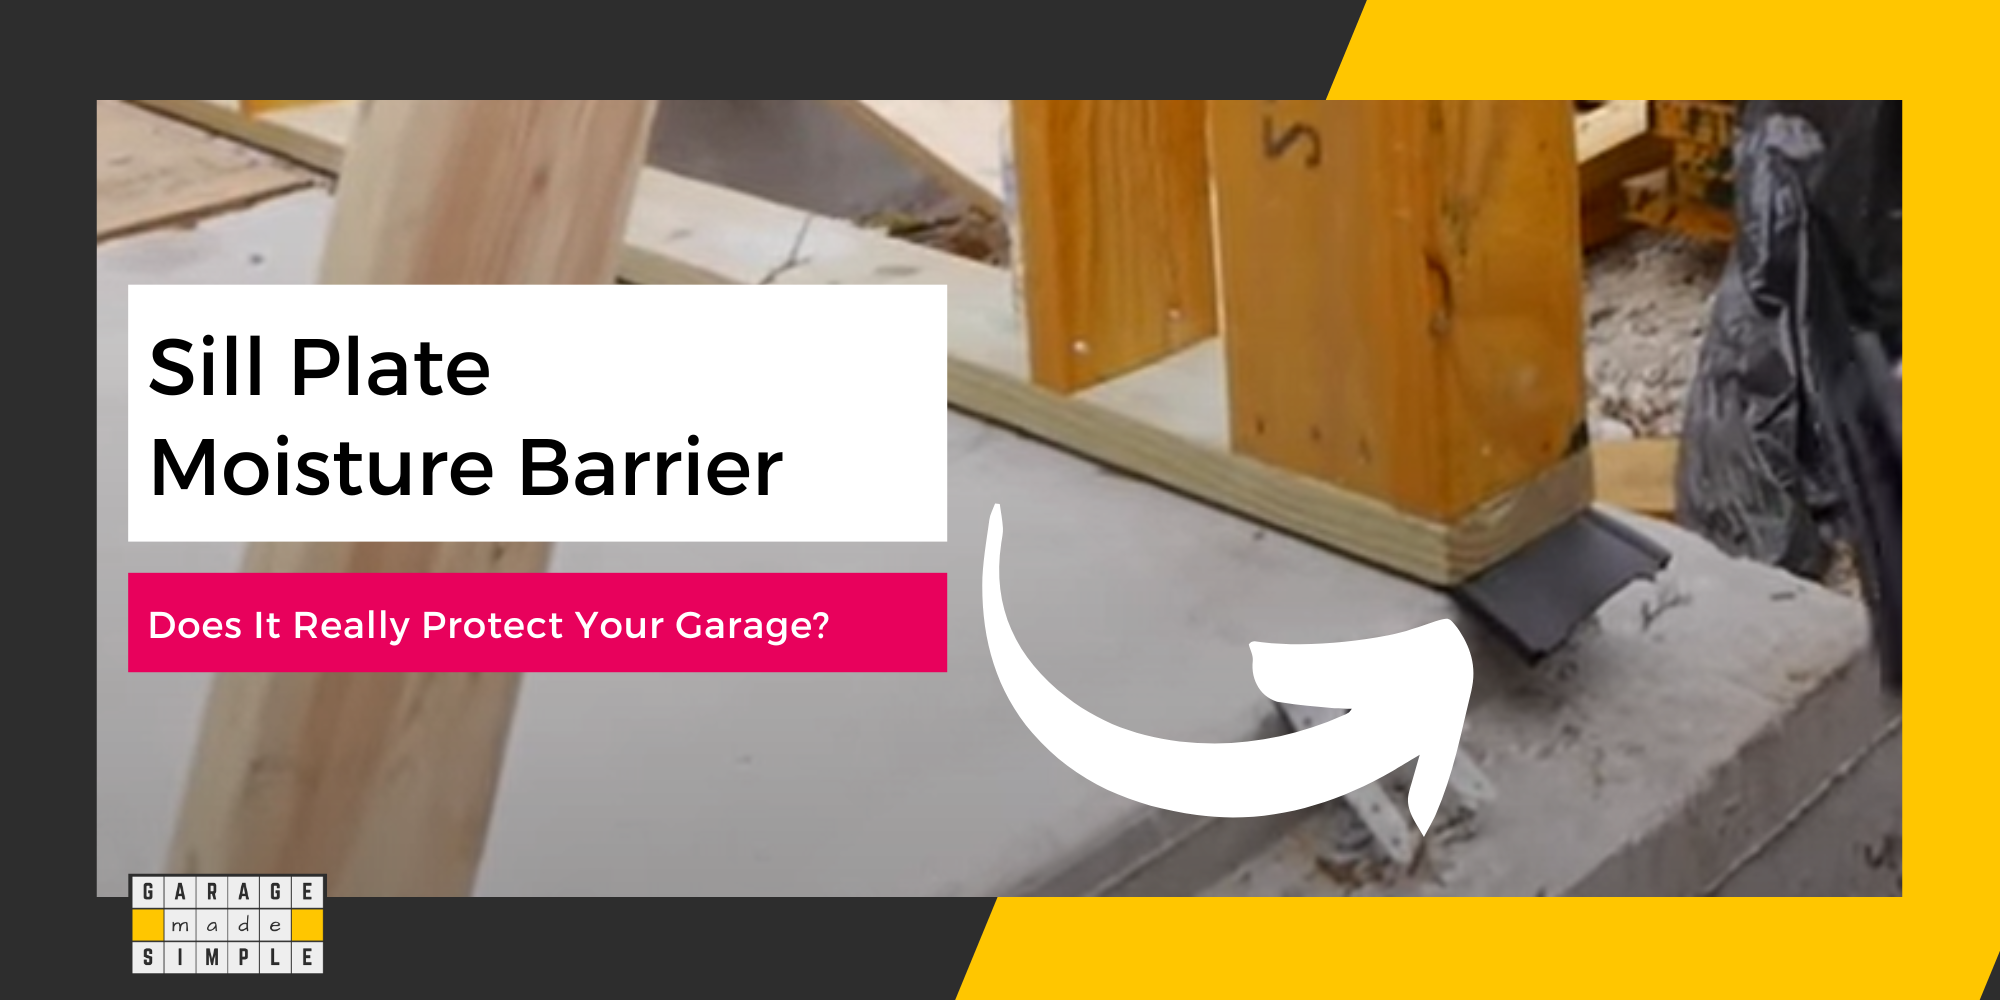 Sill Plate Moisture Barrier: Does It Really Protect Your Garage?